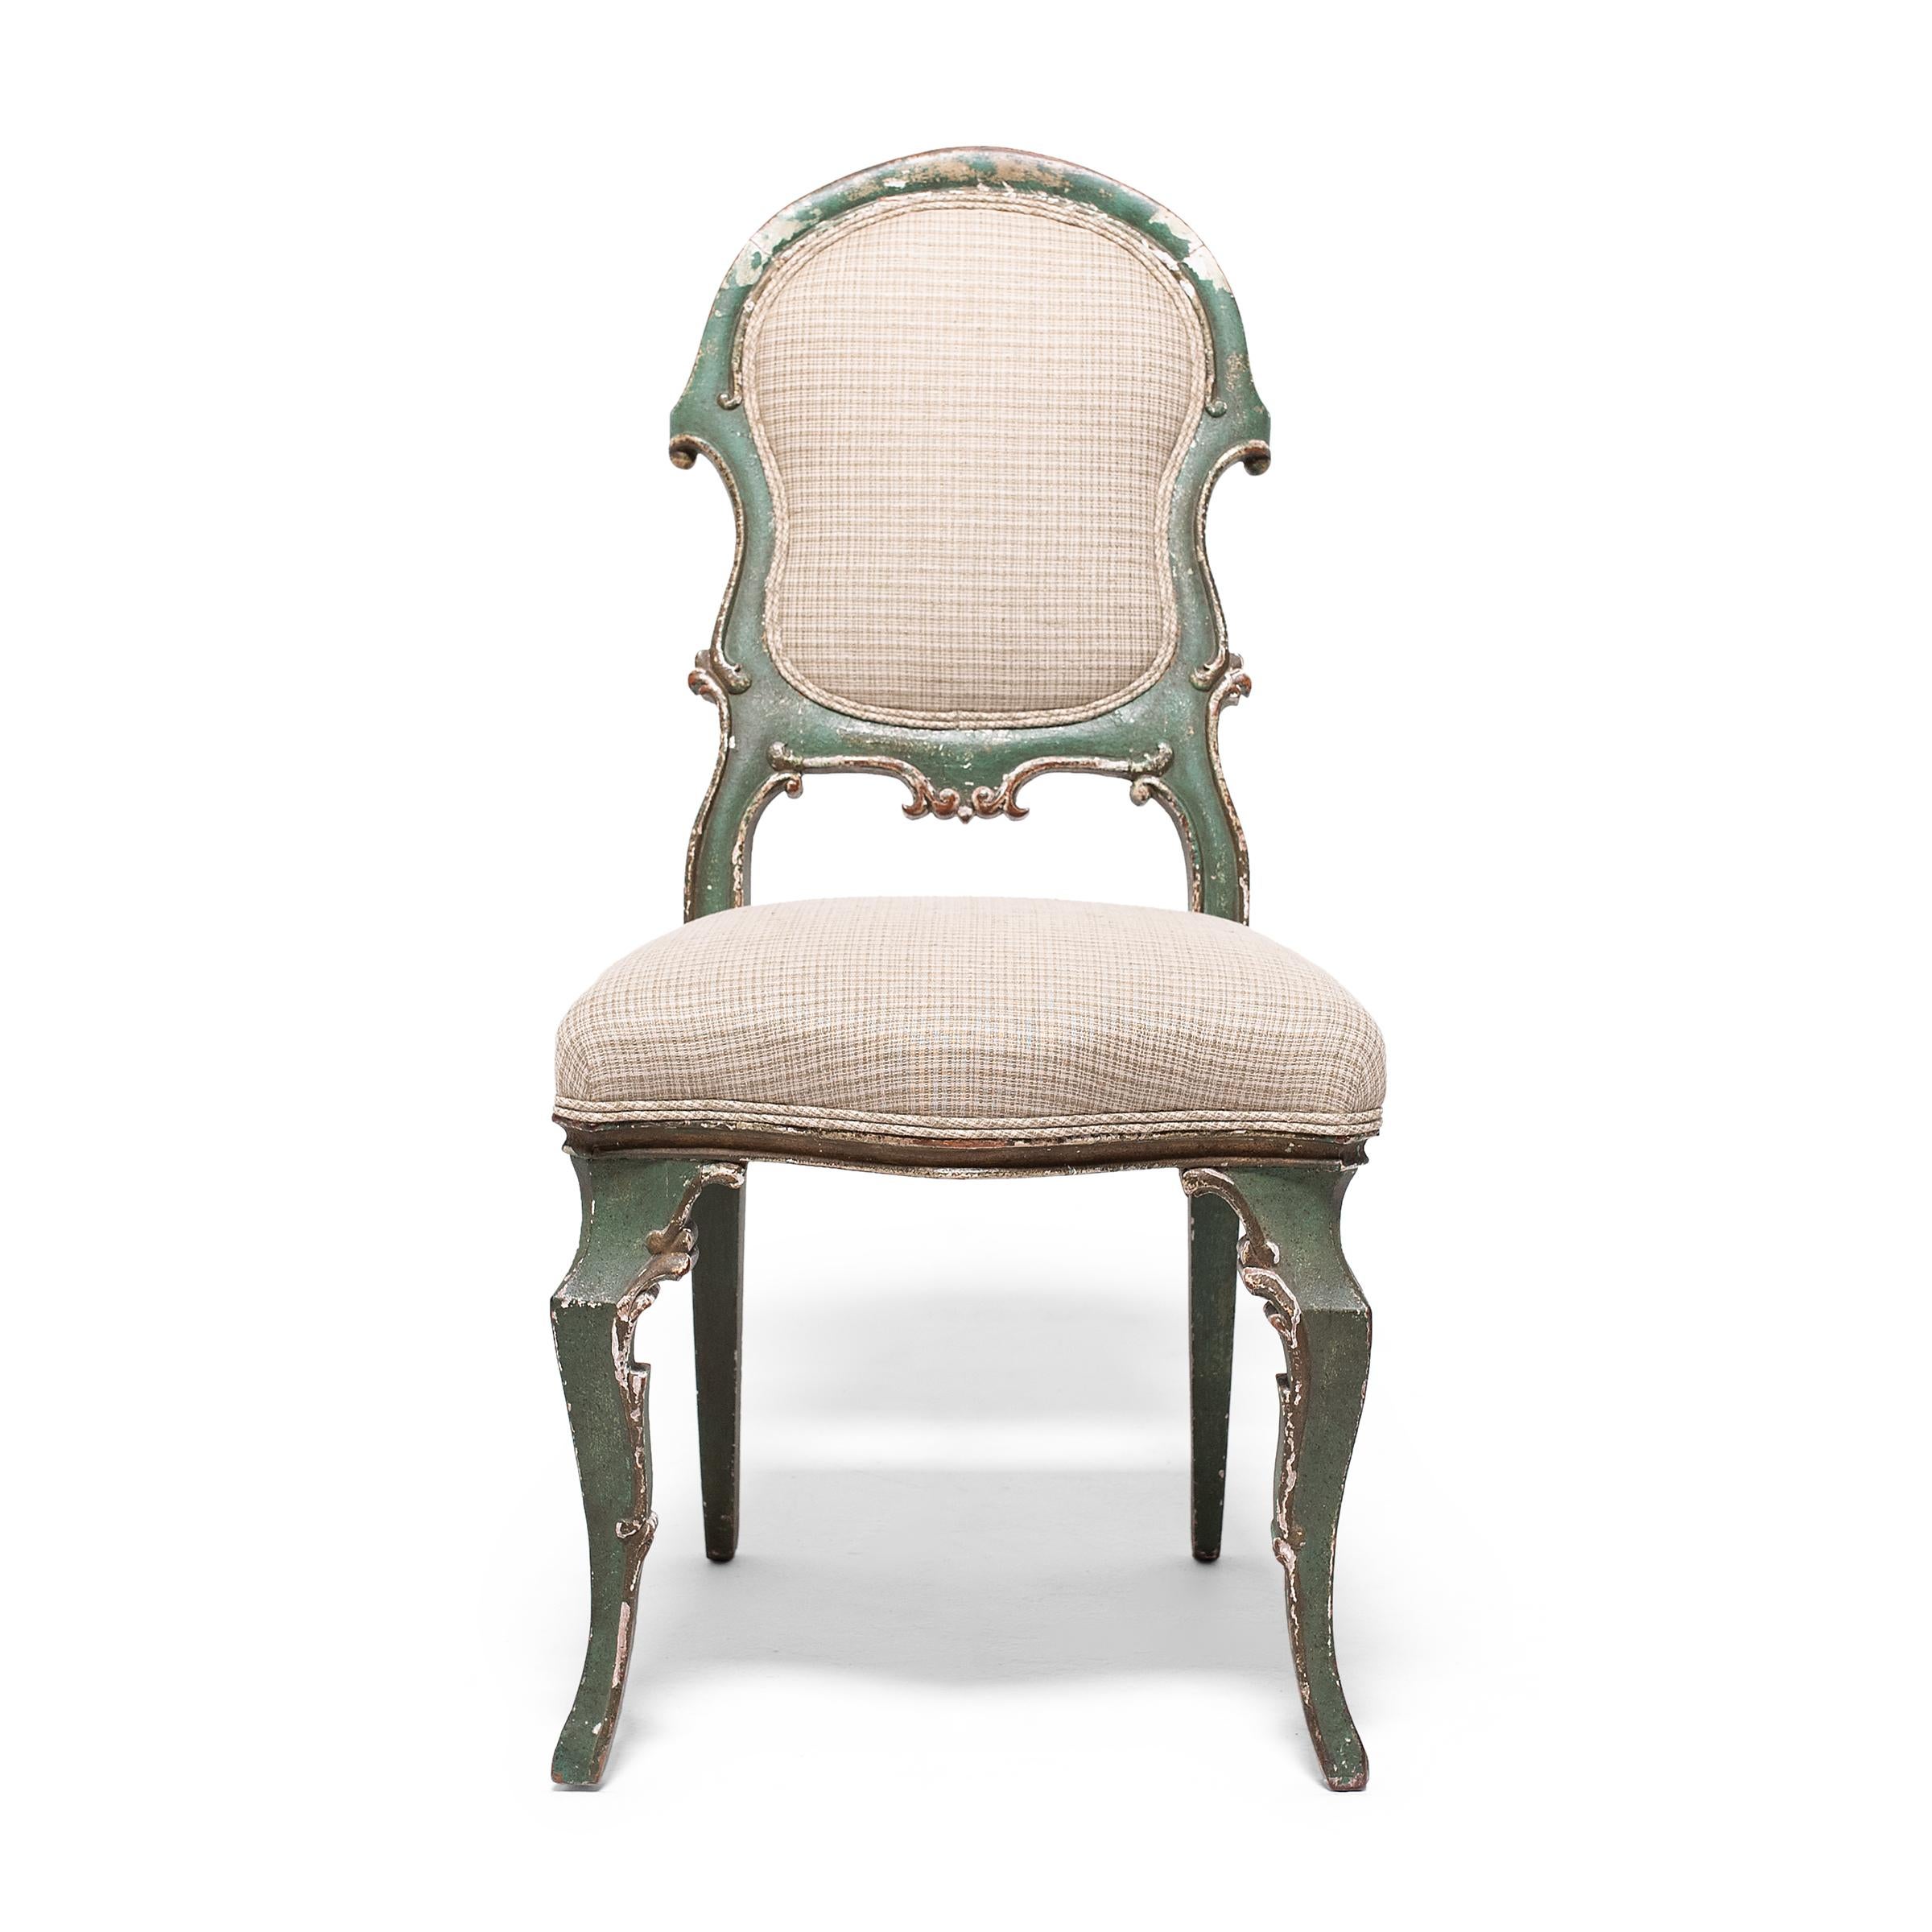 This upholstered dining chair wonderfully recreates the delicate, feminine seating of 17th and 18th century European furniture, designed in the style of Venetian Rococo and Louis XV. Dated to the early 19th century, the chair has a padded seat and